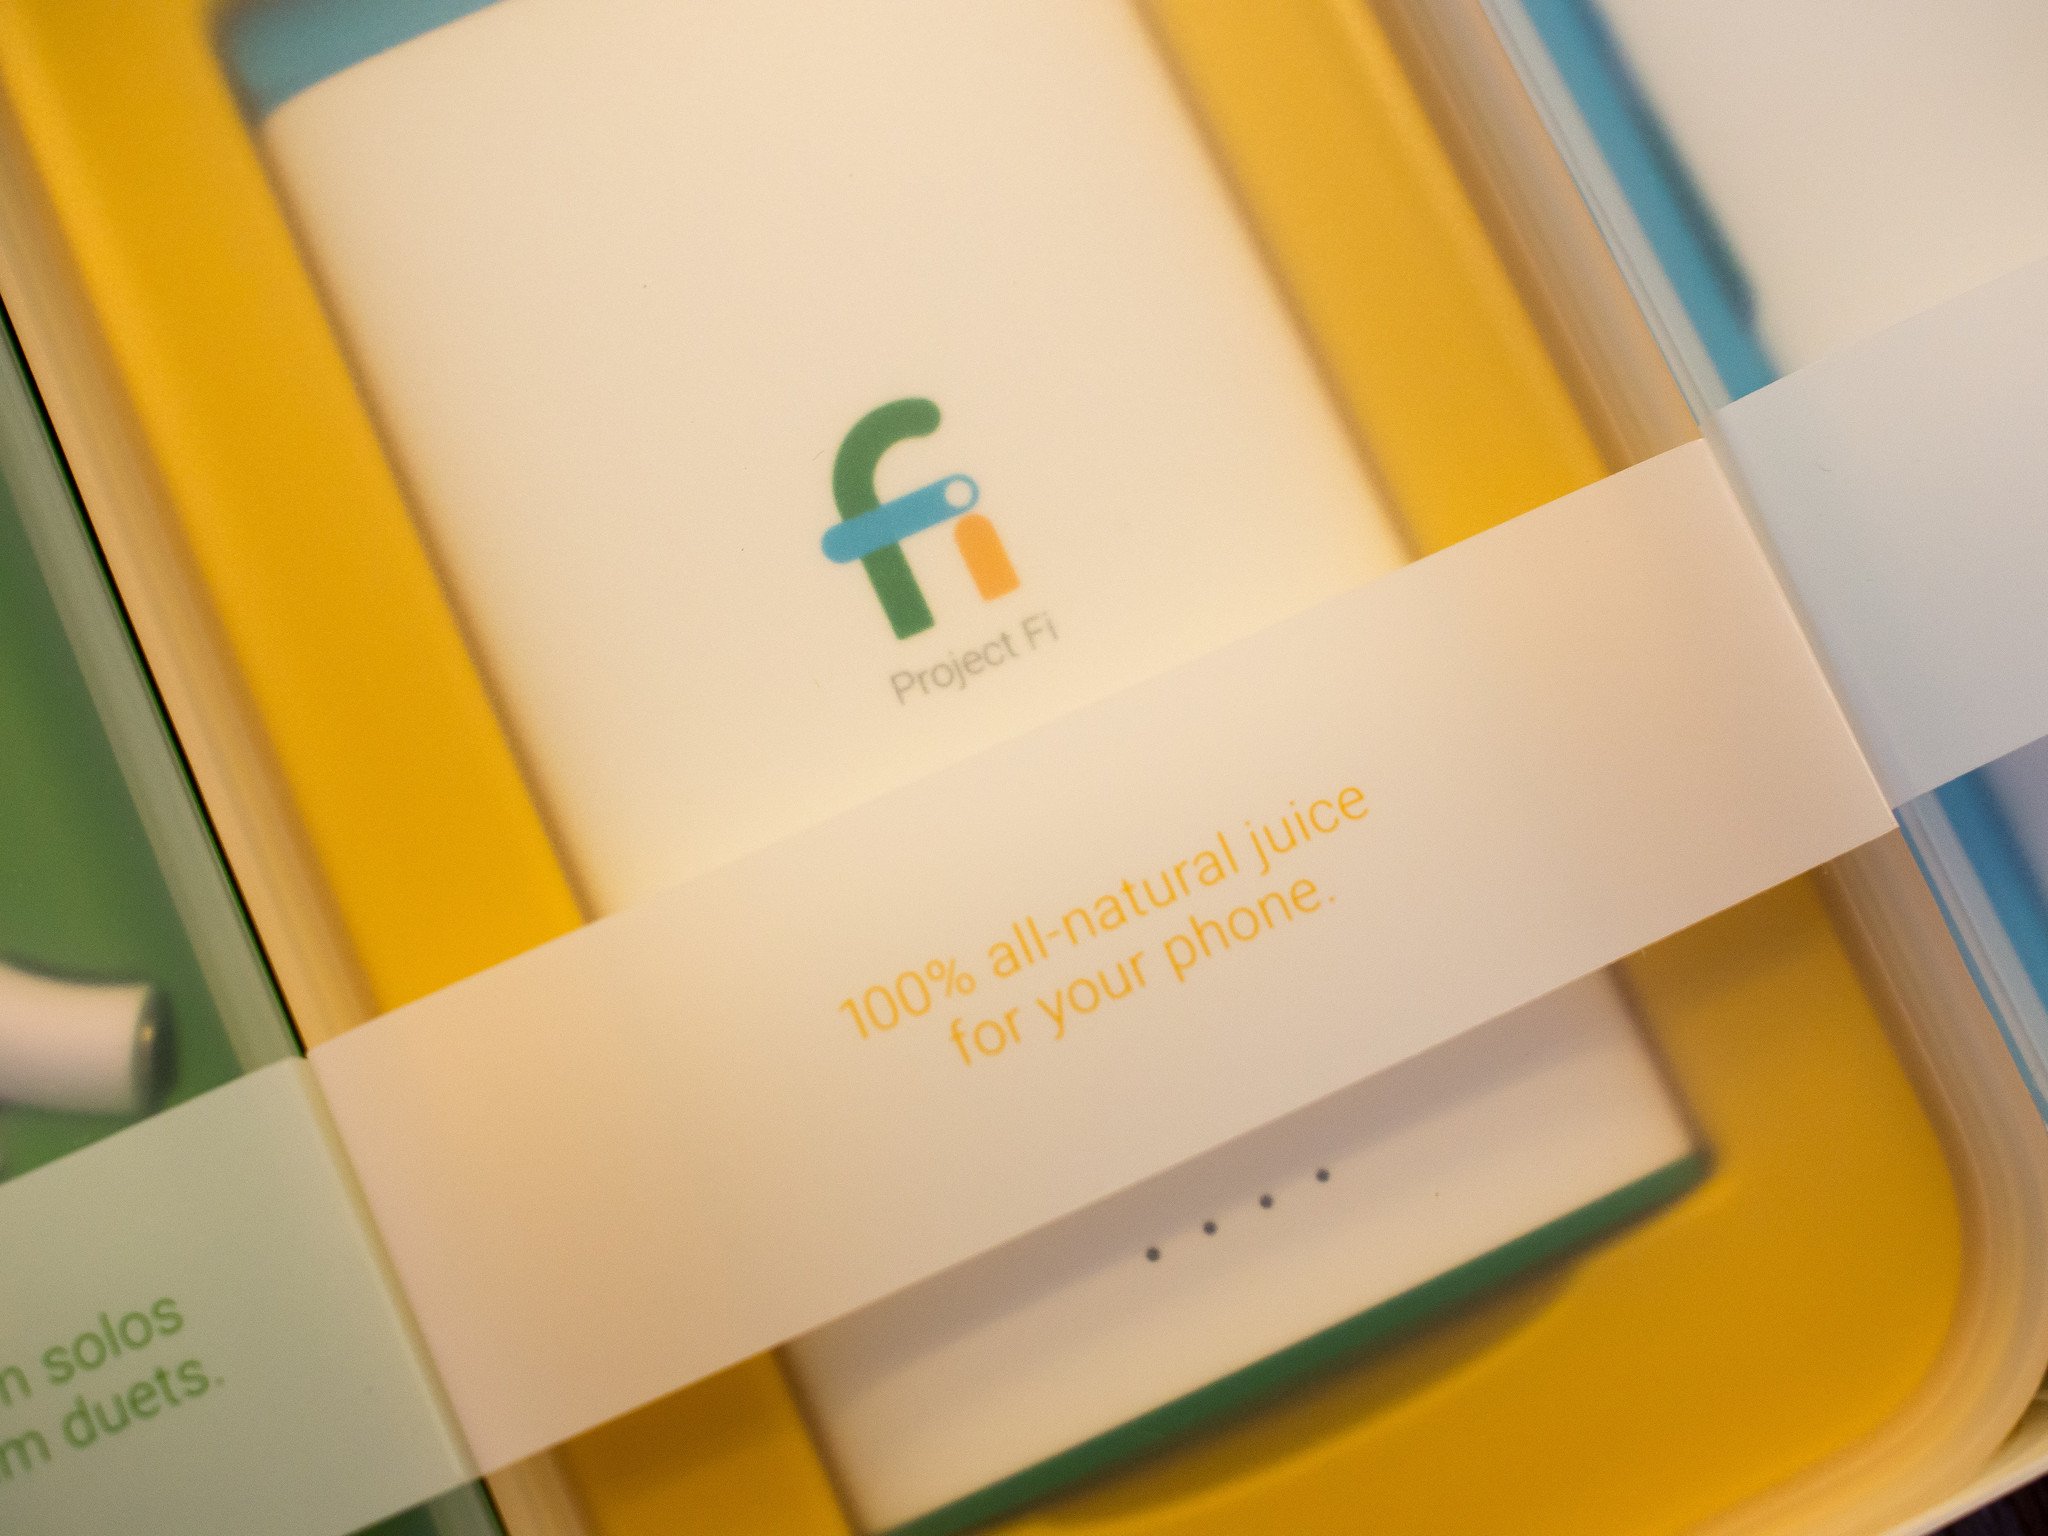 Google is giving out instant invites to Project Fi for the